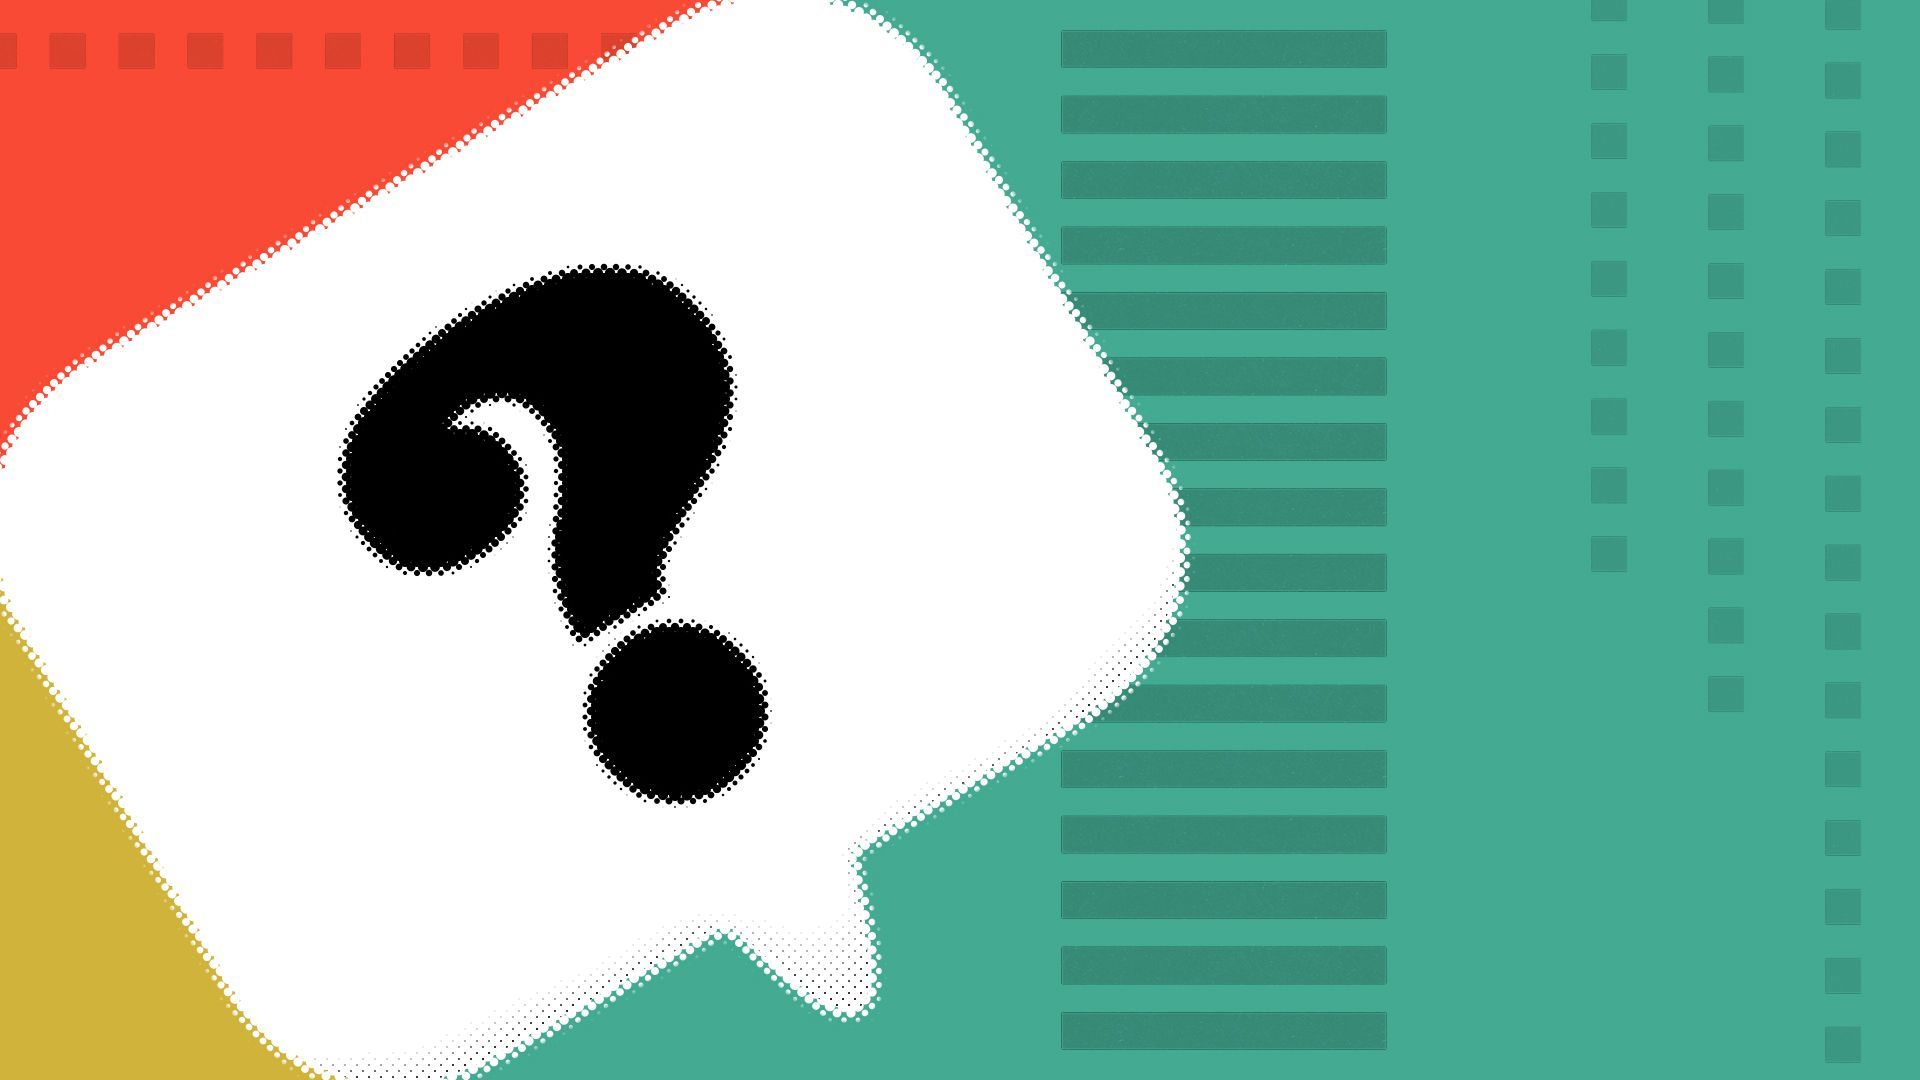 Illustration of a question mark in a speech bubble with ballot elements in the background.